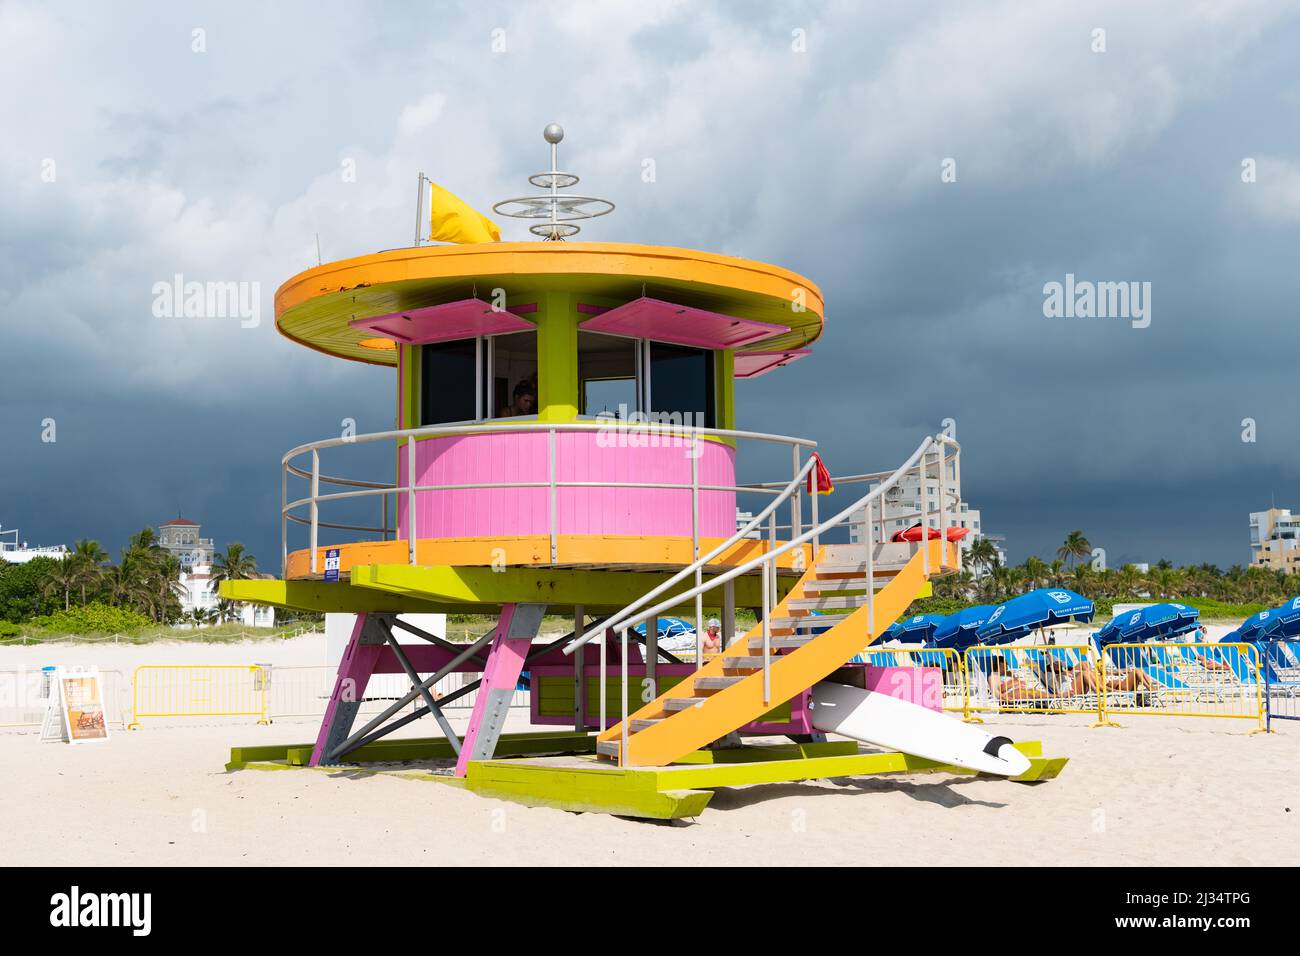 Miami, USA - March 19, 2021: miami beach lifeguard house on sand in south beach located in Florida. Stock Photo